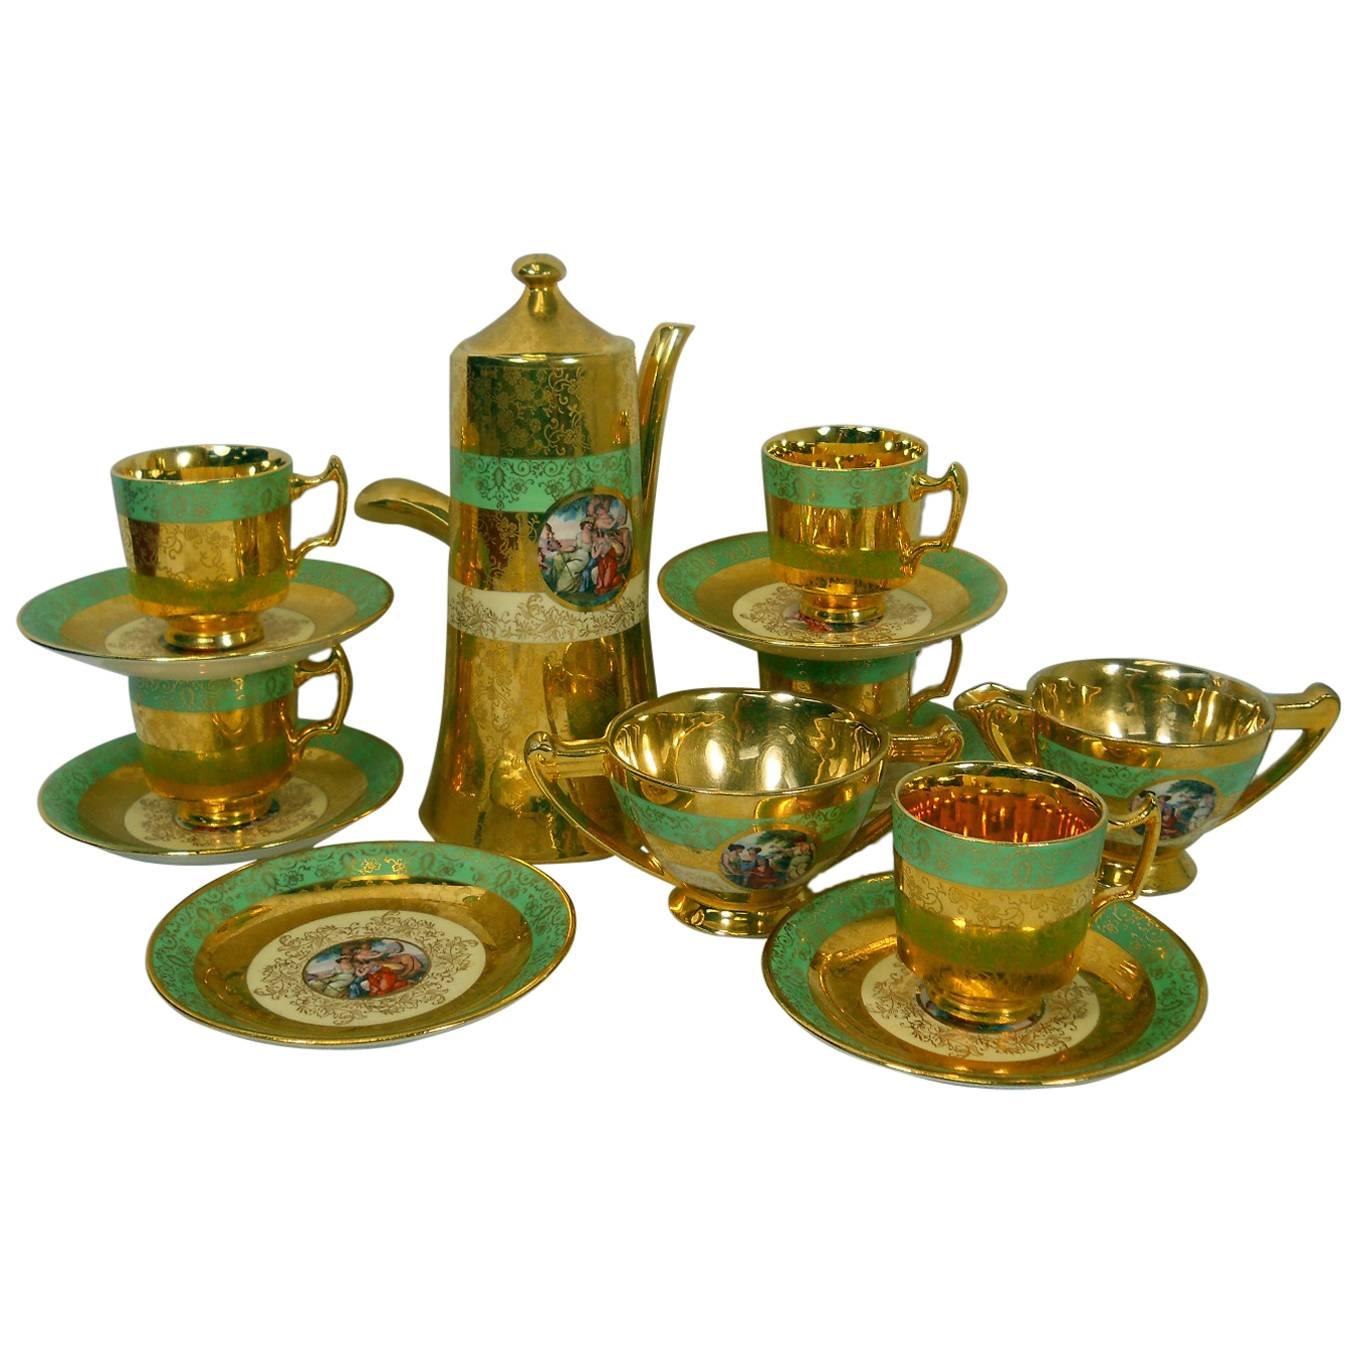 Le Mieux France Lem14 Pattern 15-Piece Chocolate Set Gold Encrusted Green People